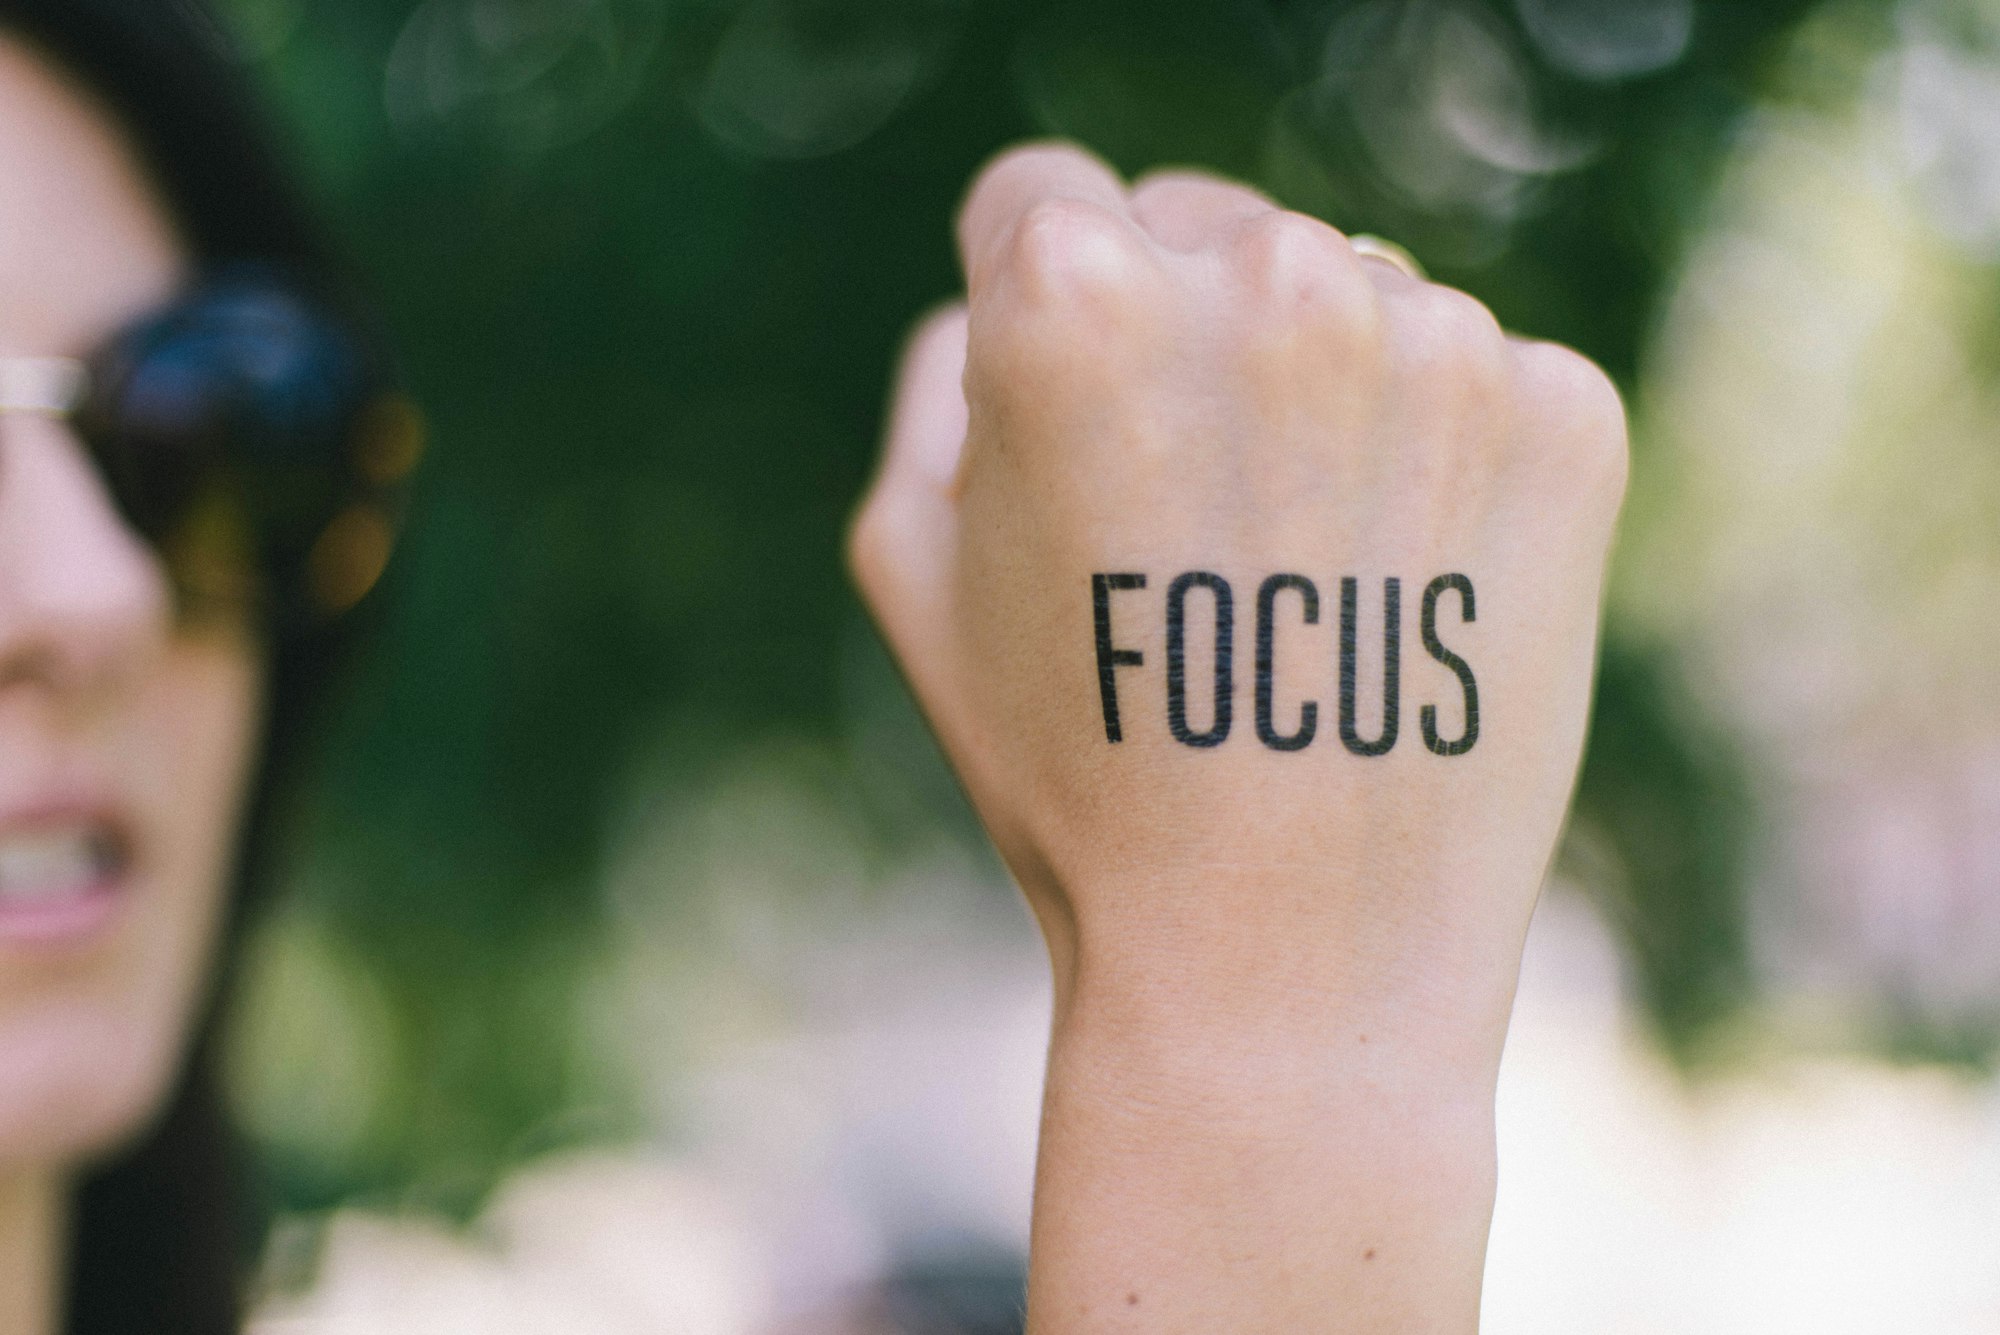 How to remain focused and achieve more?